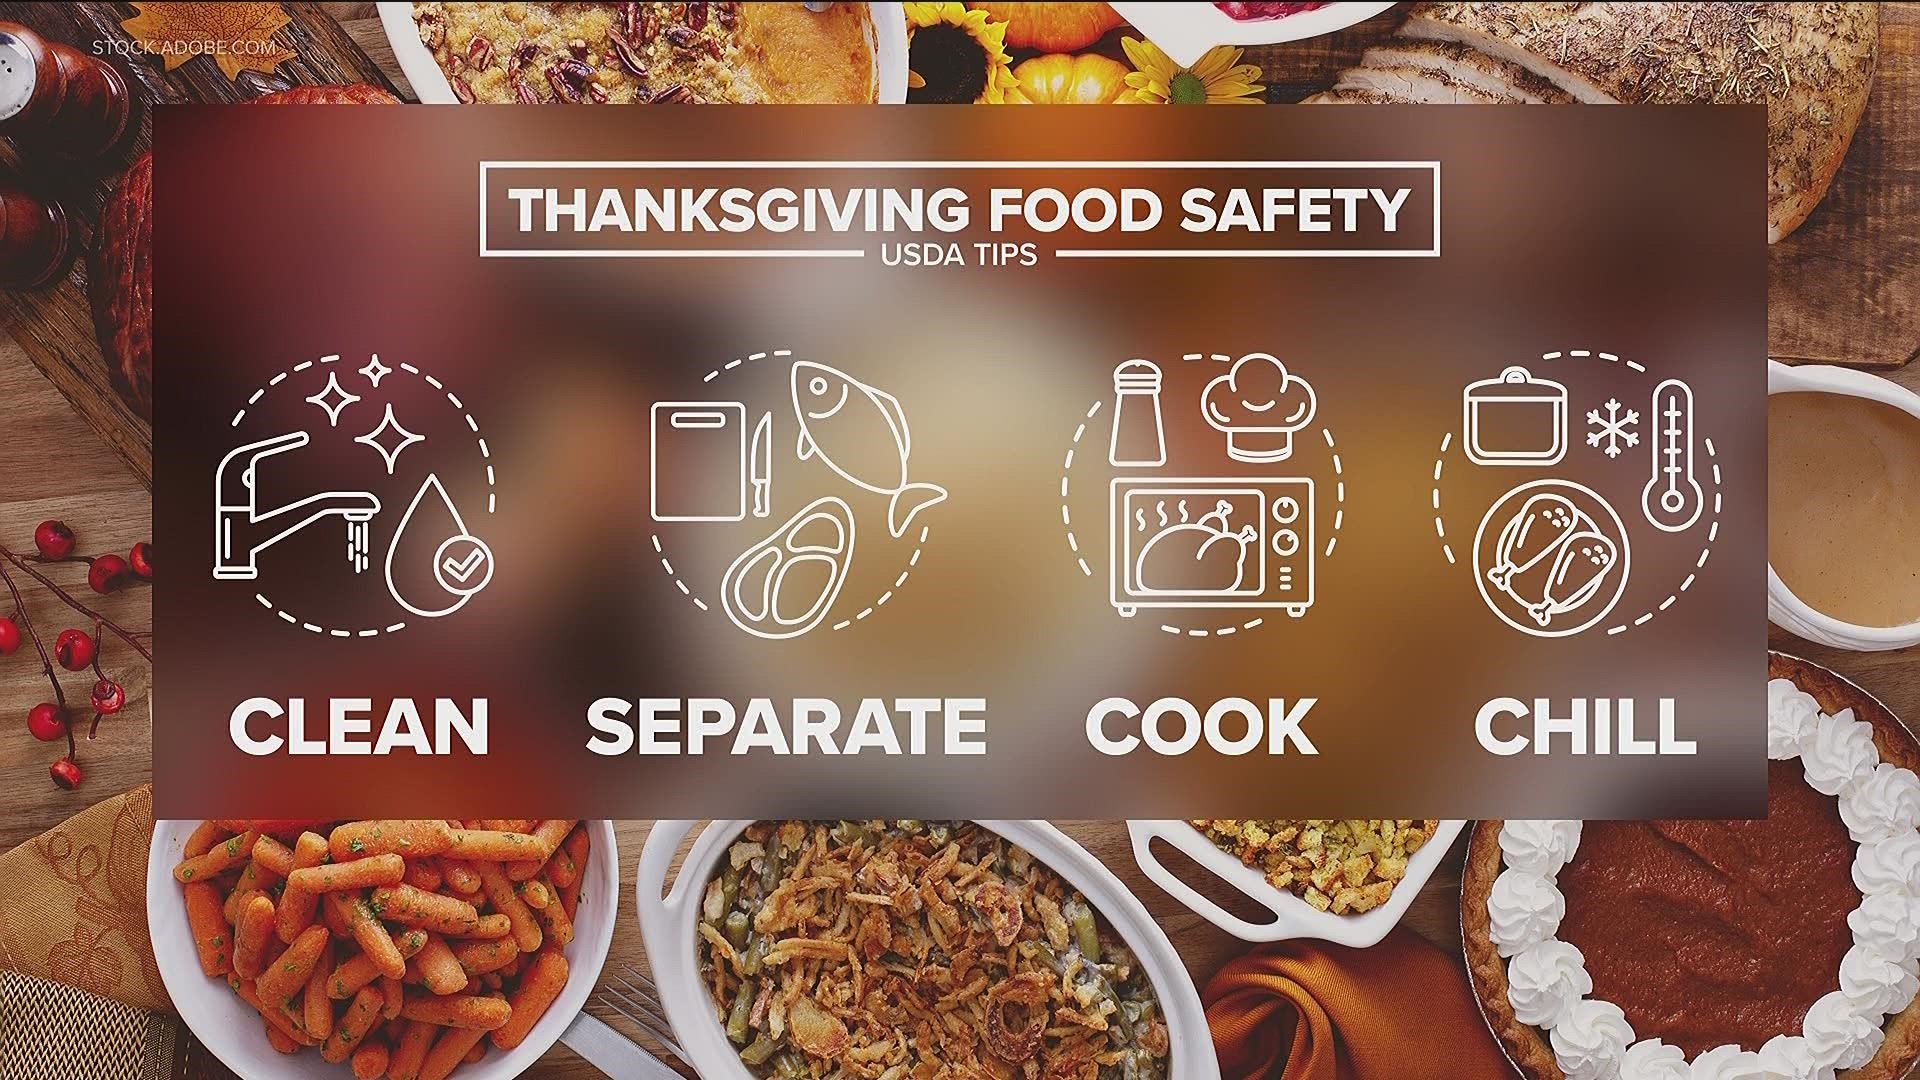 The USDA is trying to make sure your Thanksgiving meal is safe and healthy this year.